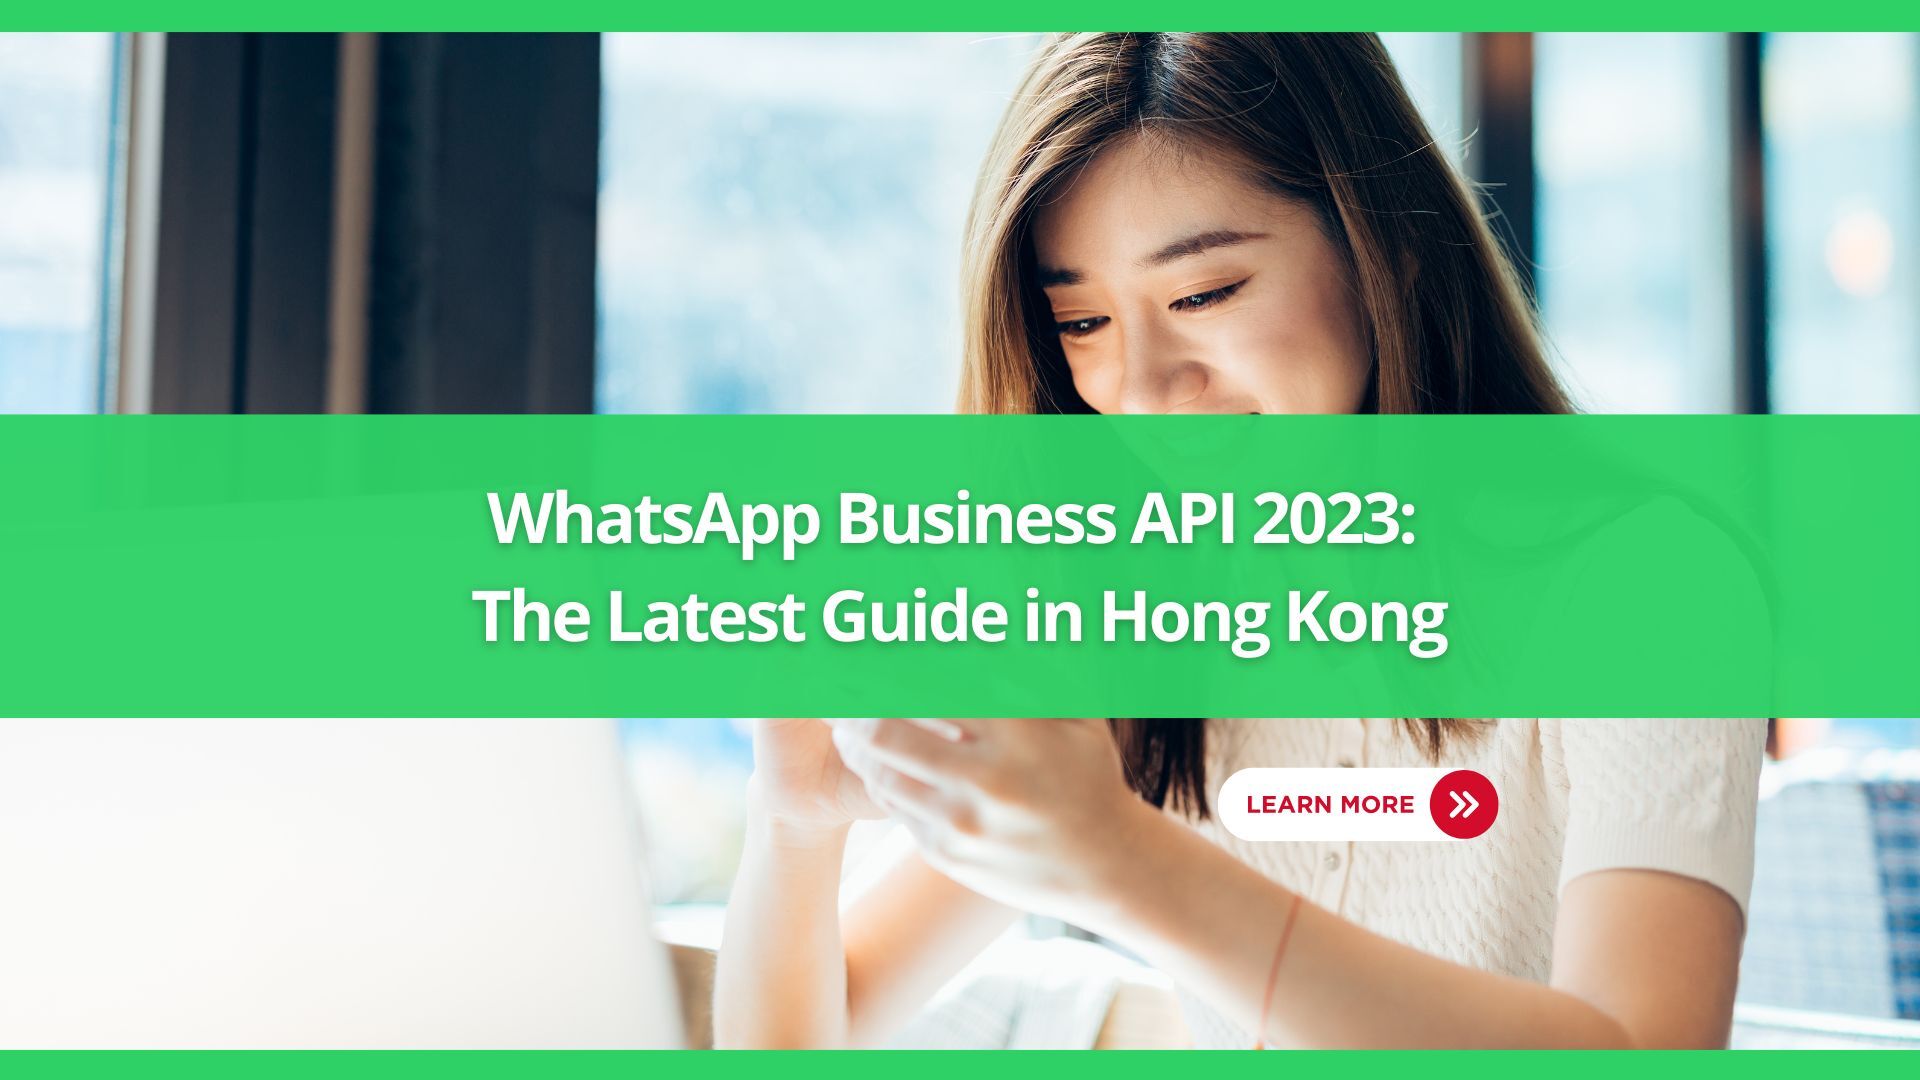 WhatsApp Business API 2023: The Latest Guide in Hong Kong